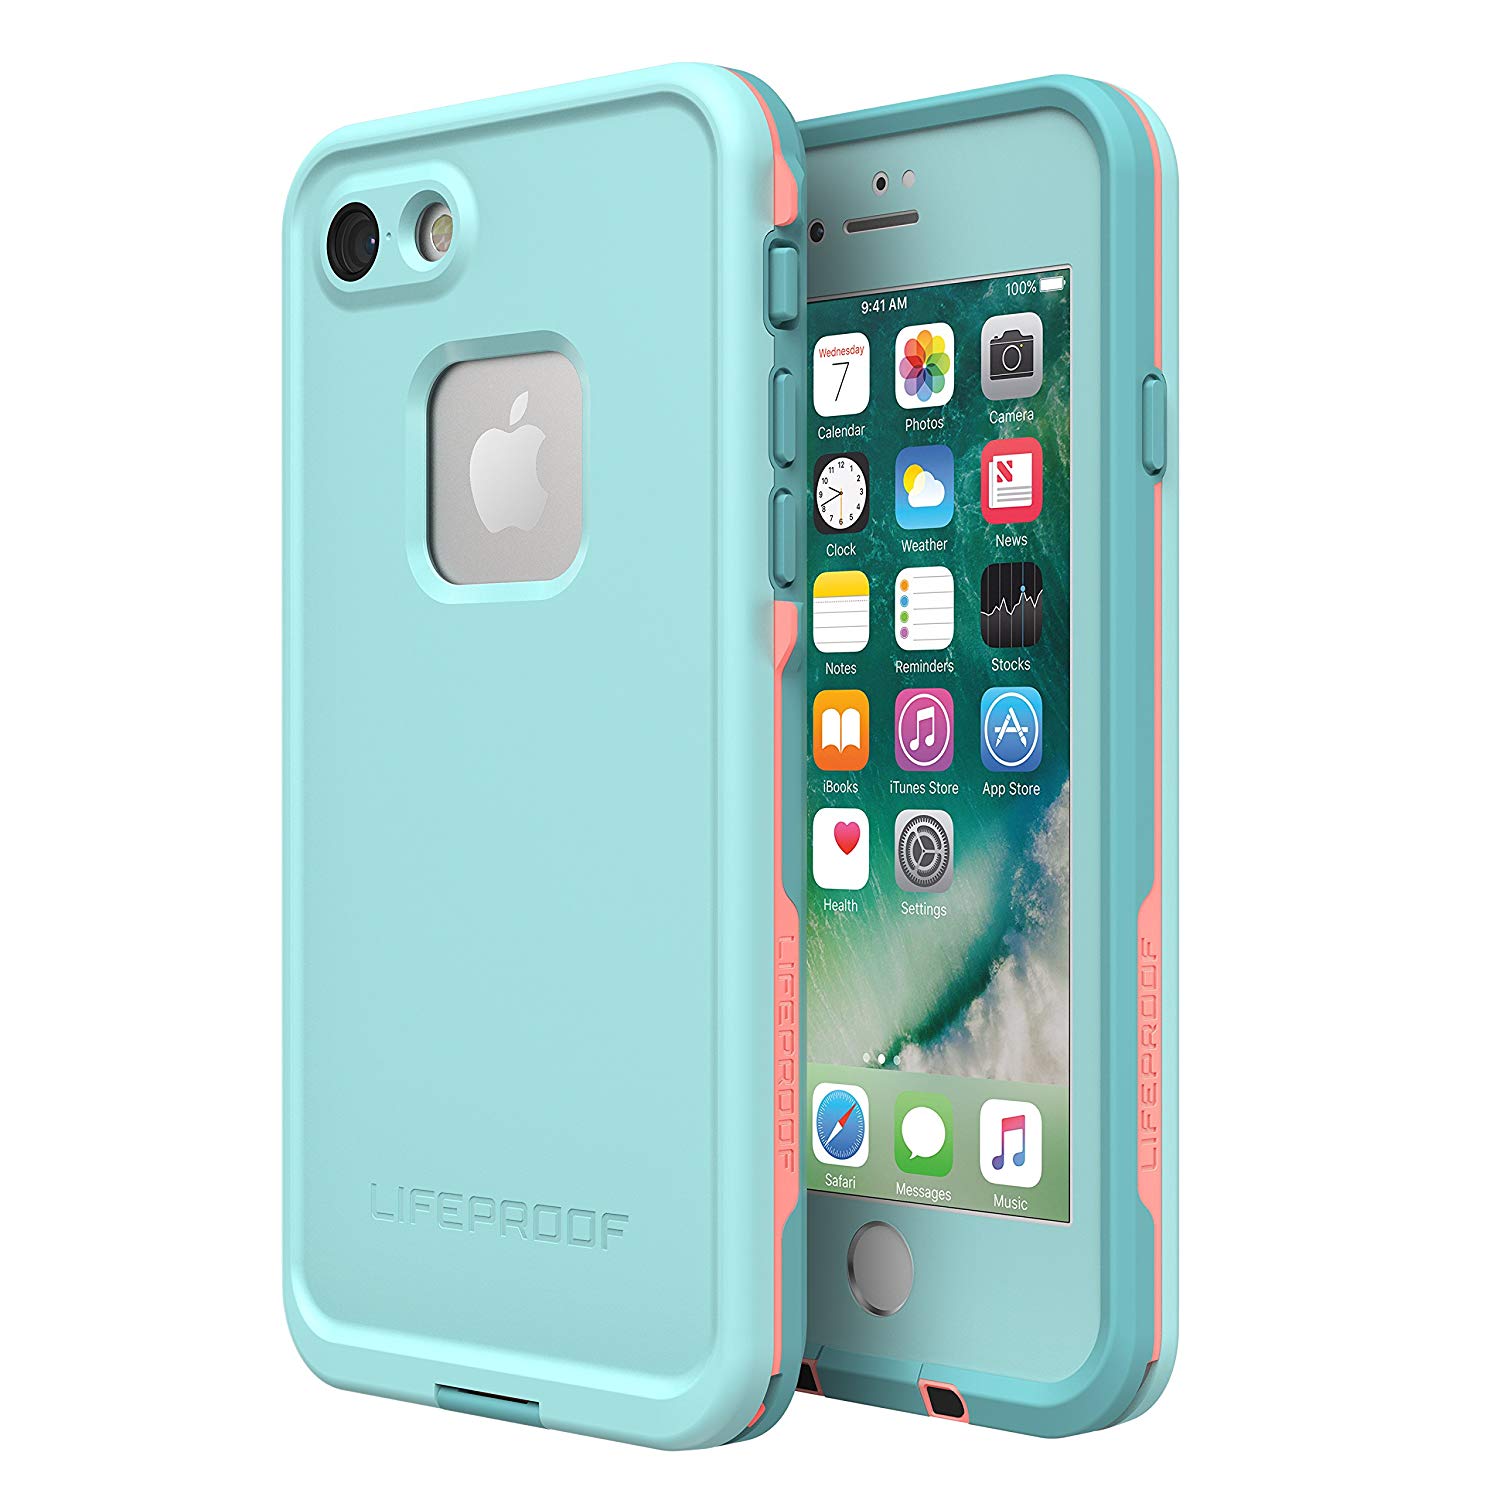 Lifeproof FRE series case